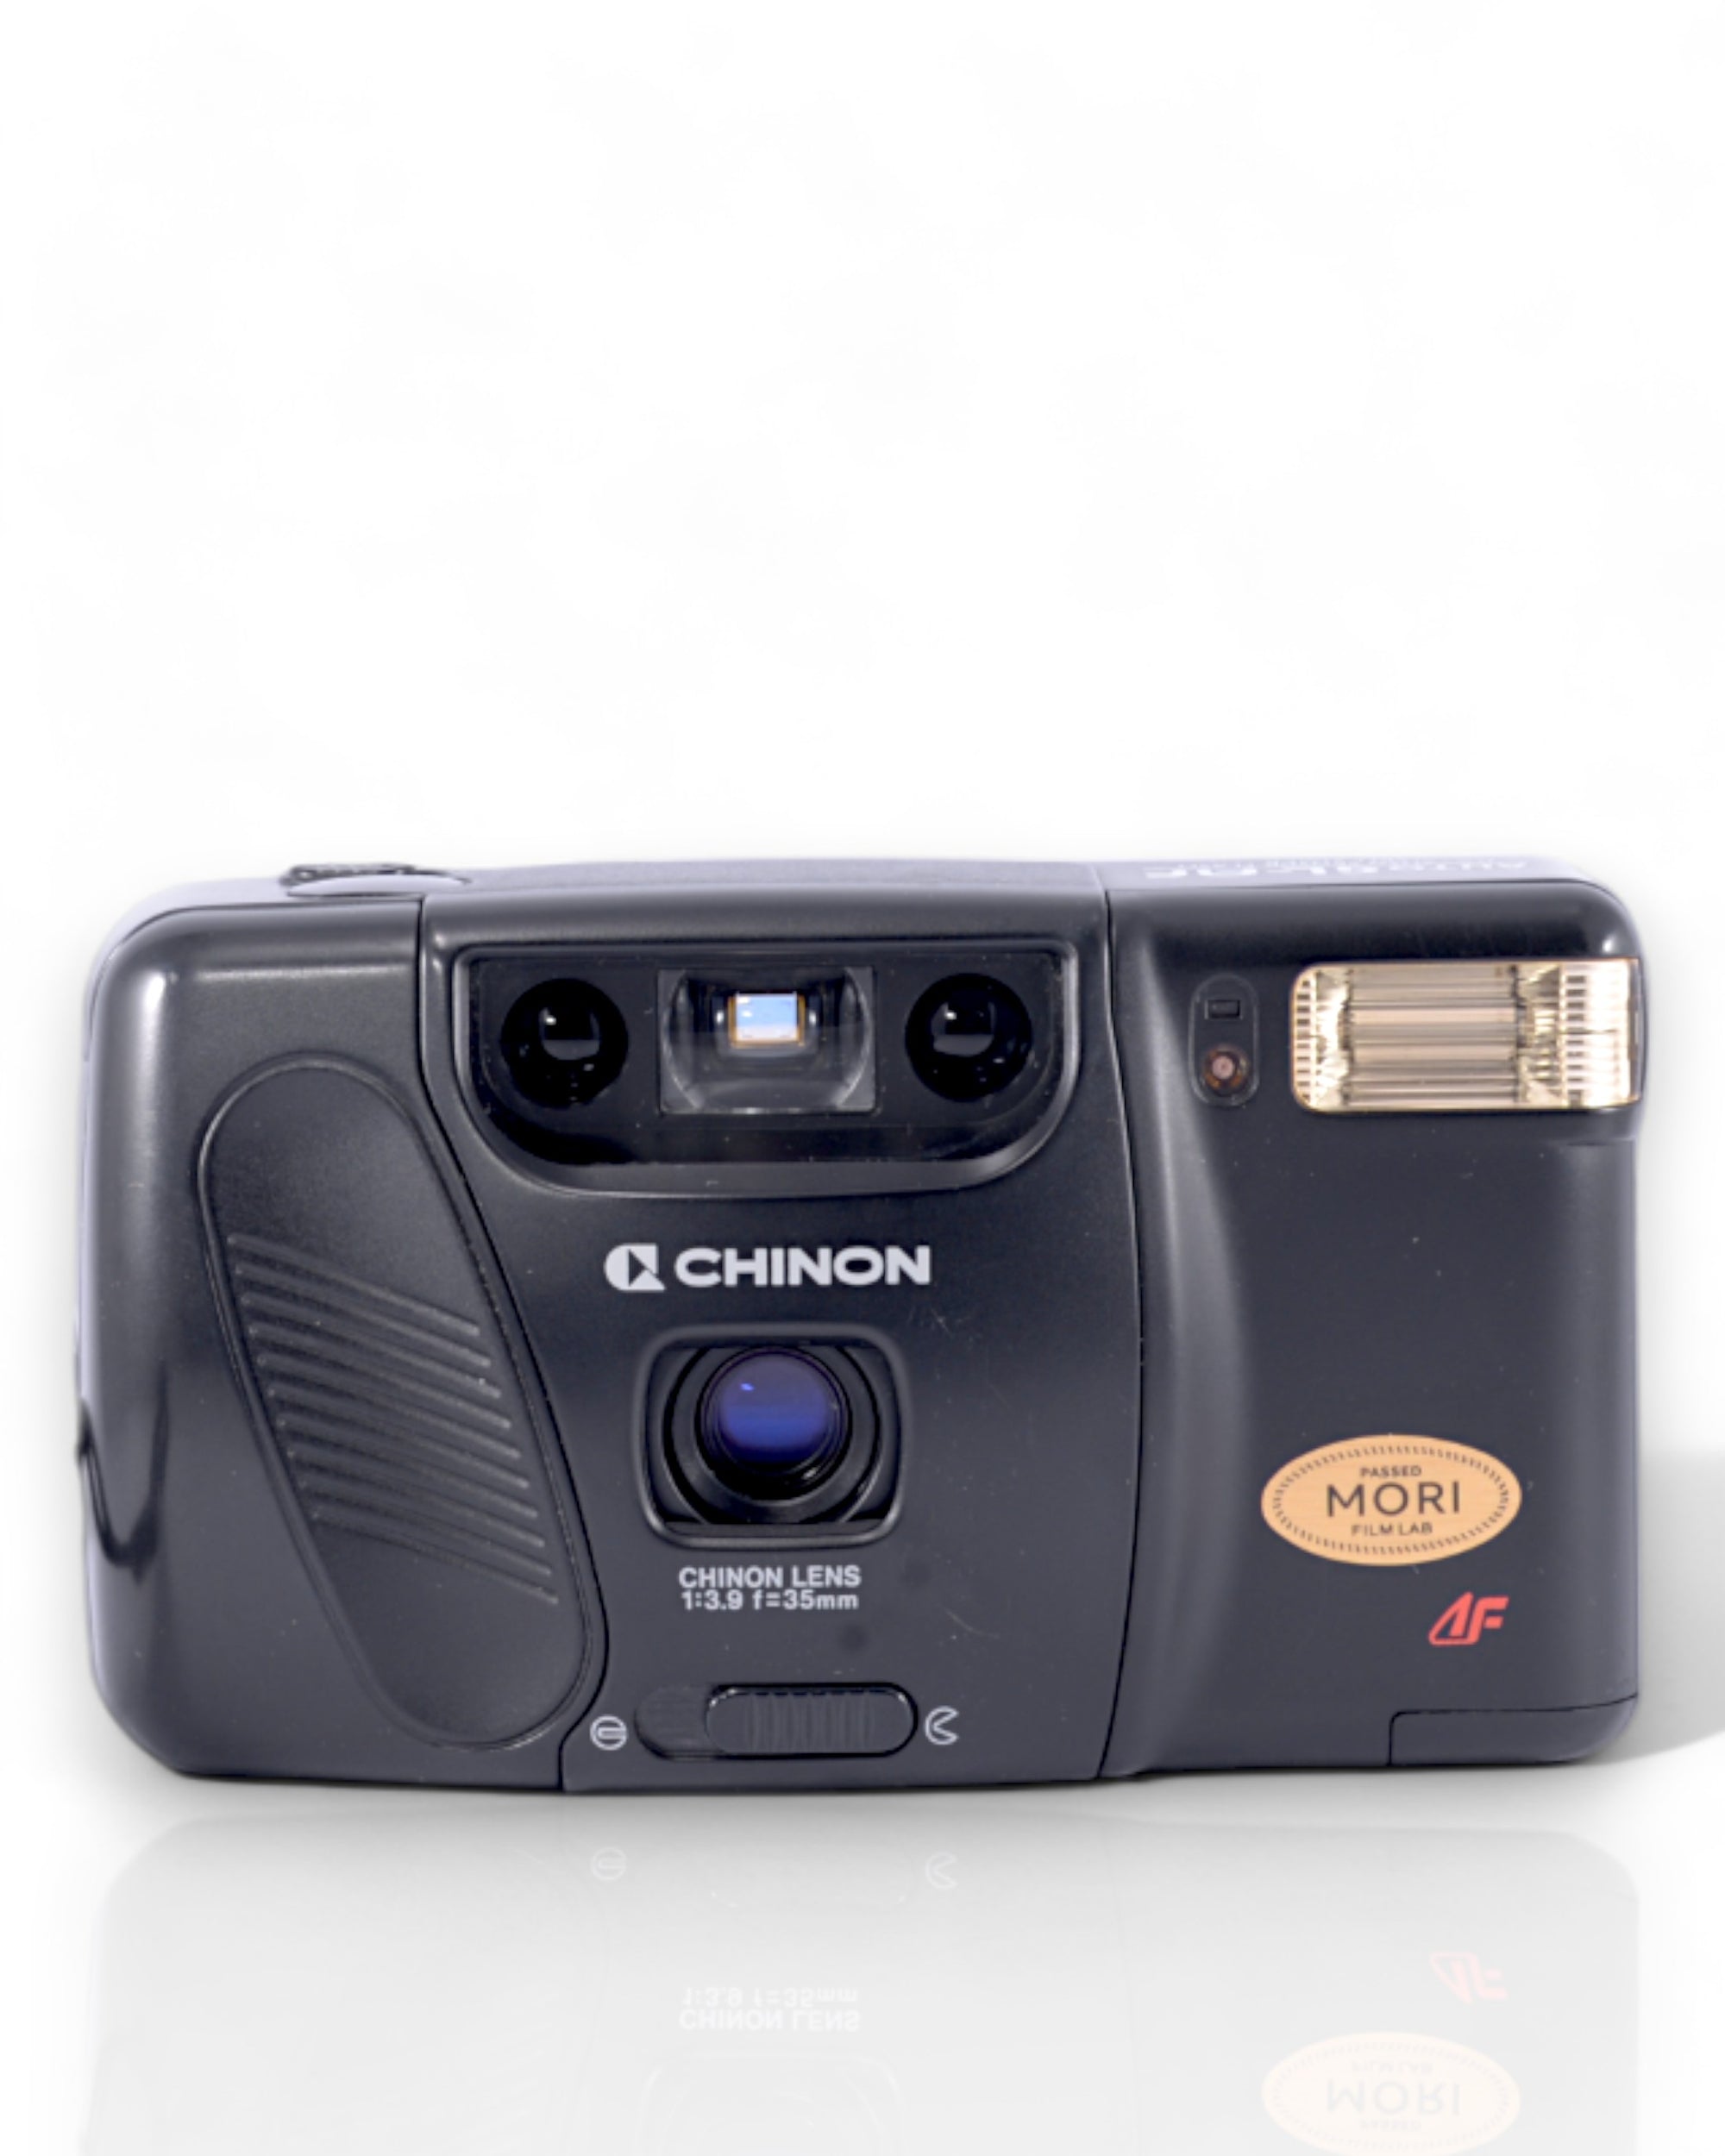 Chinon Auto GL 35mm point & shoot film camera with 35mm lens